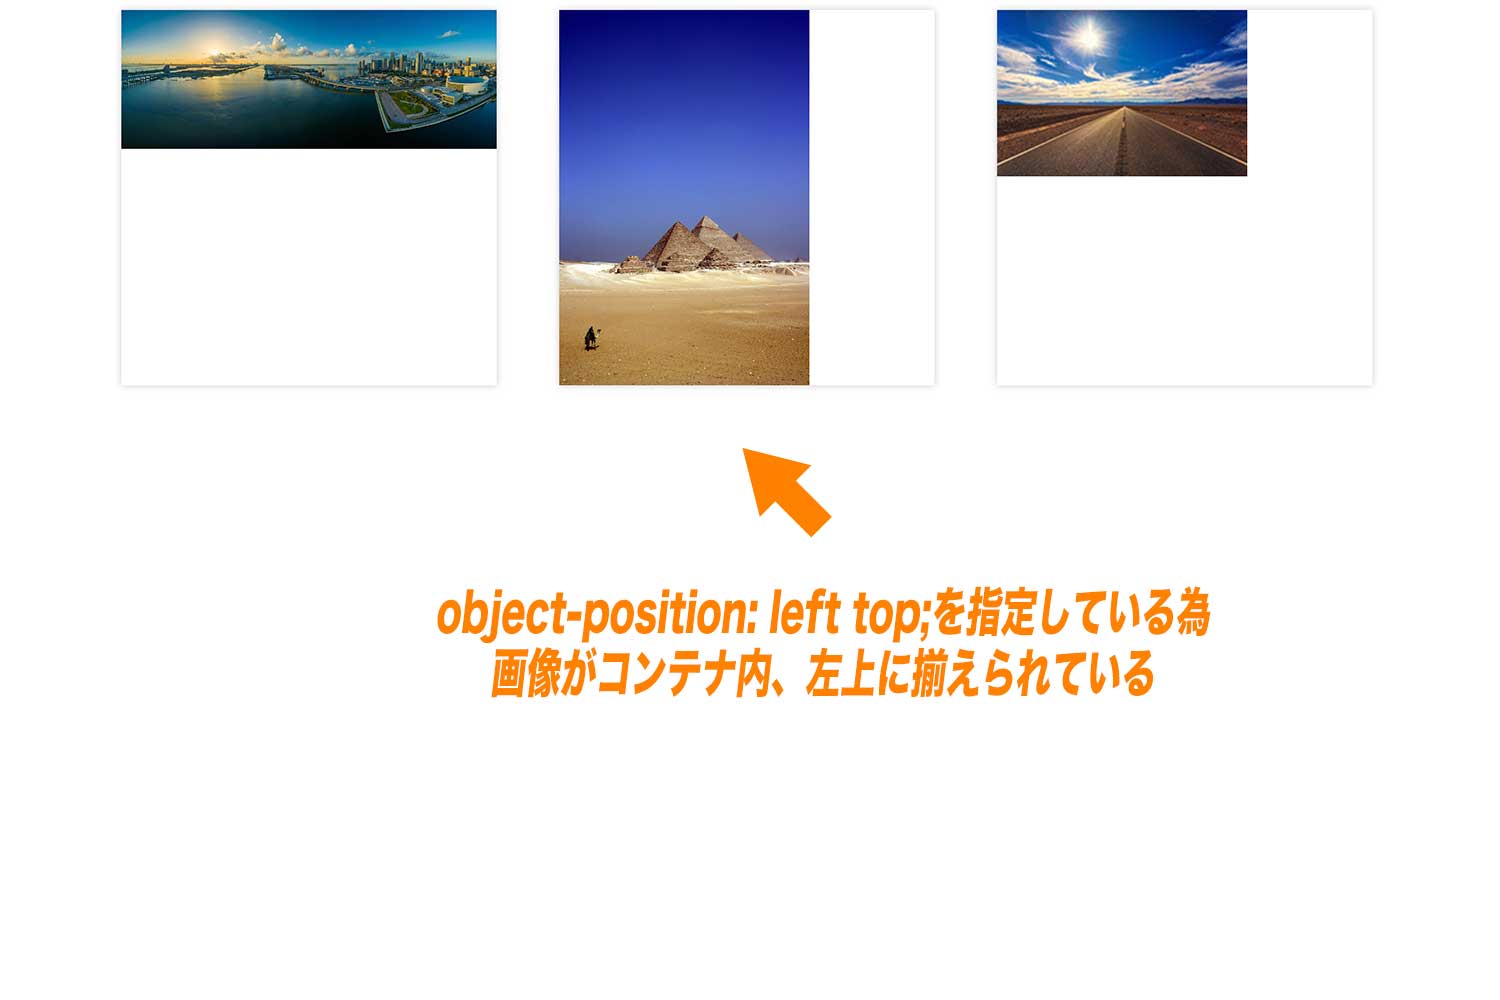 object-position: left top;の使用例